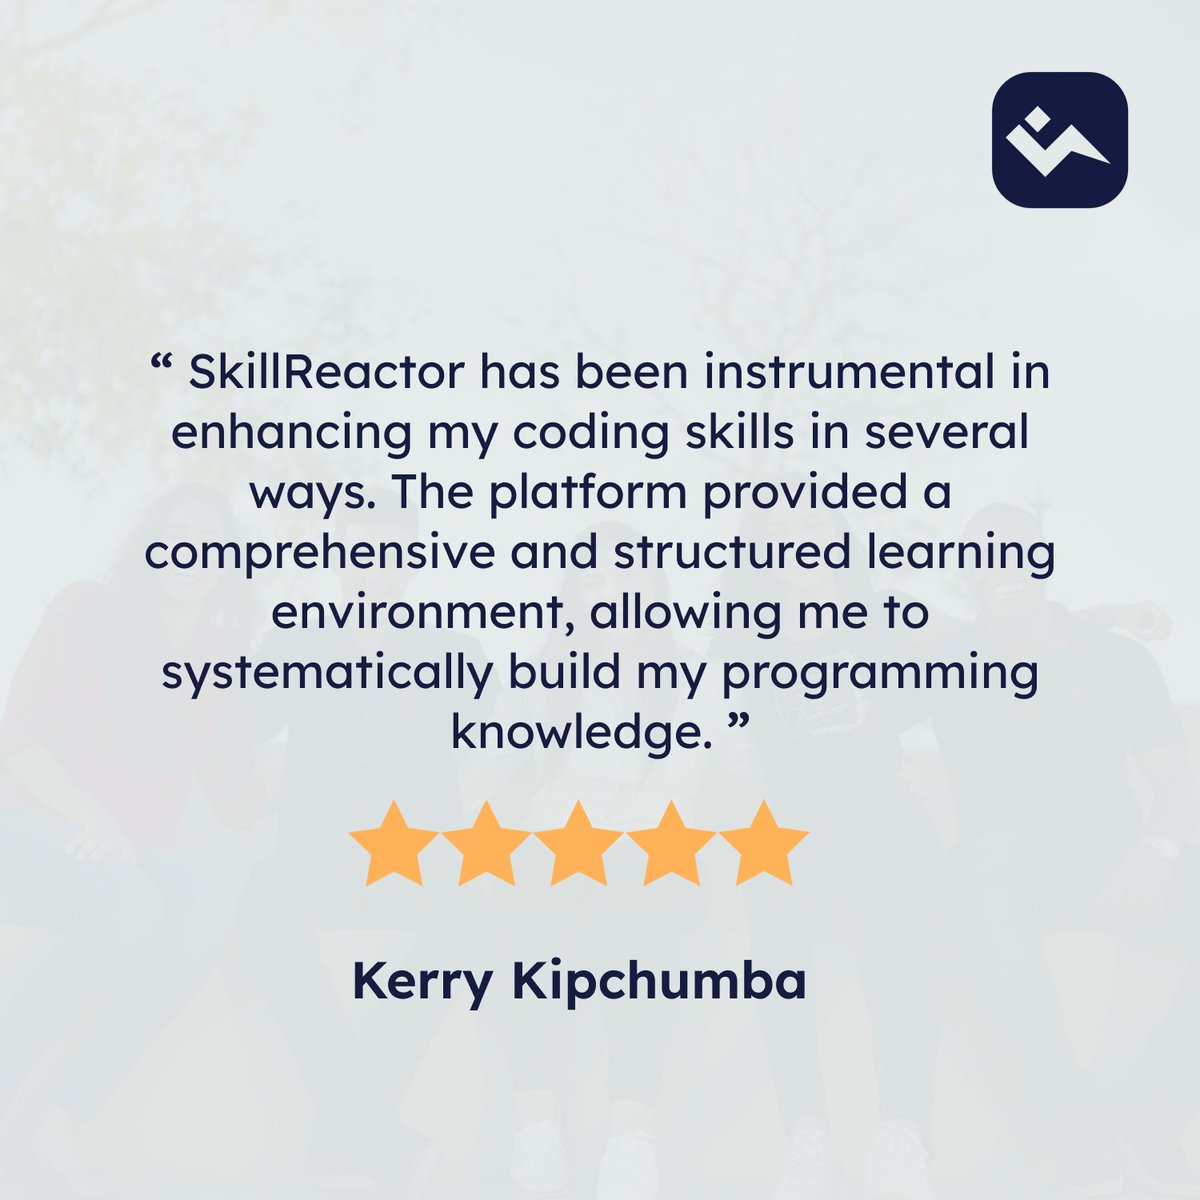 Hear it from our users! Kerry shares his SkillReactor experience and how it impacted his coding journey. 

#developersuccess #codingjourney #usertestimonial🚀